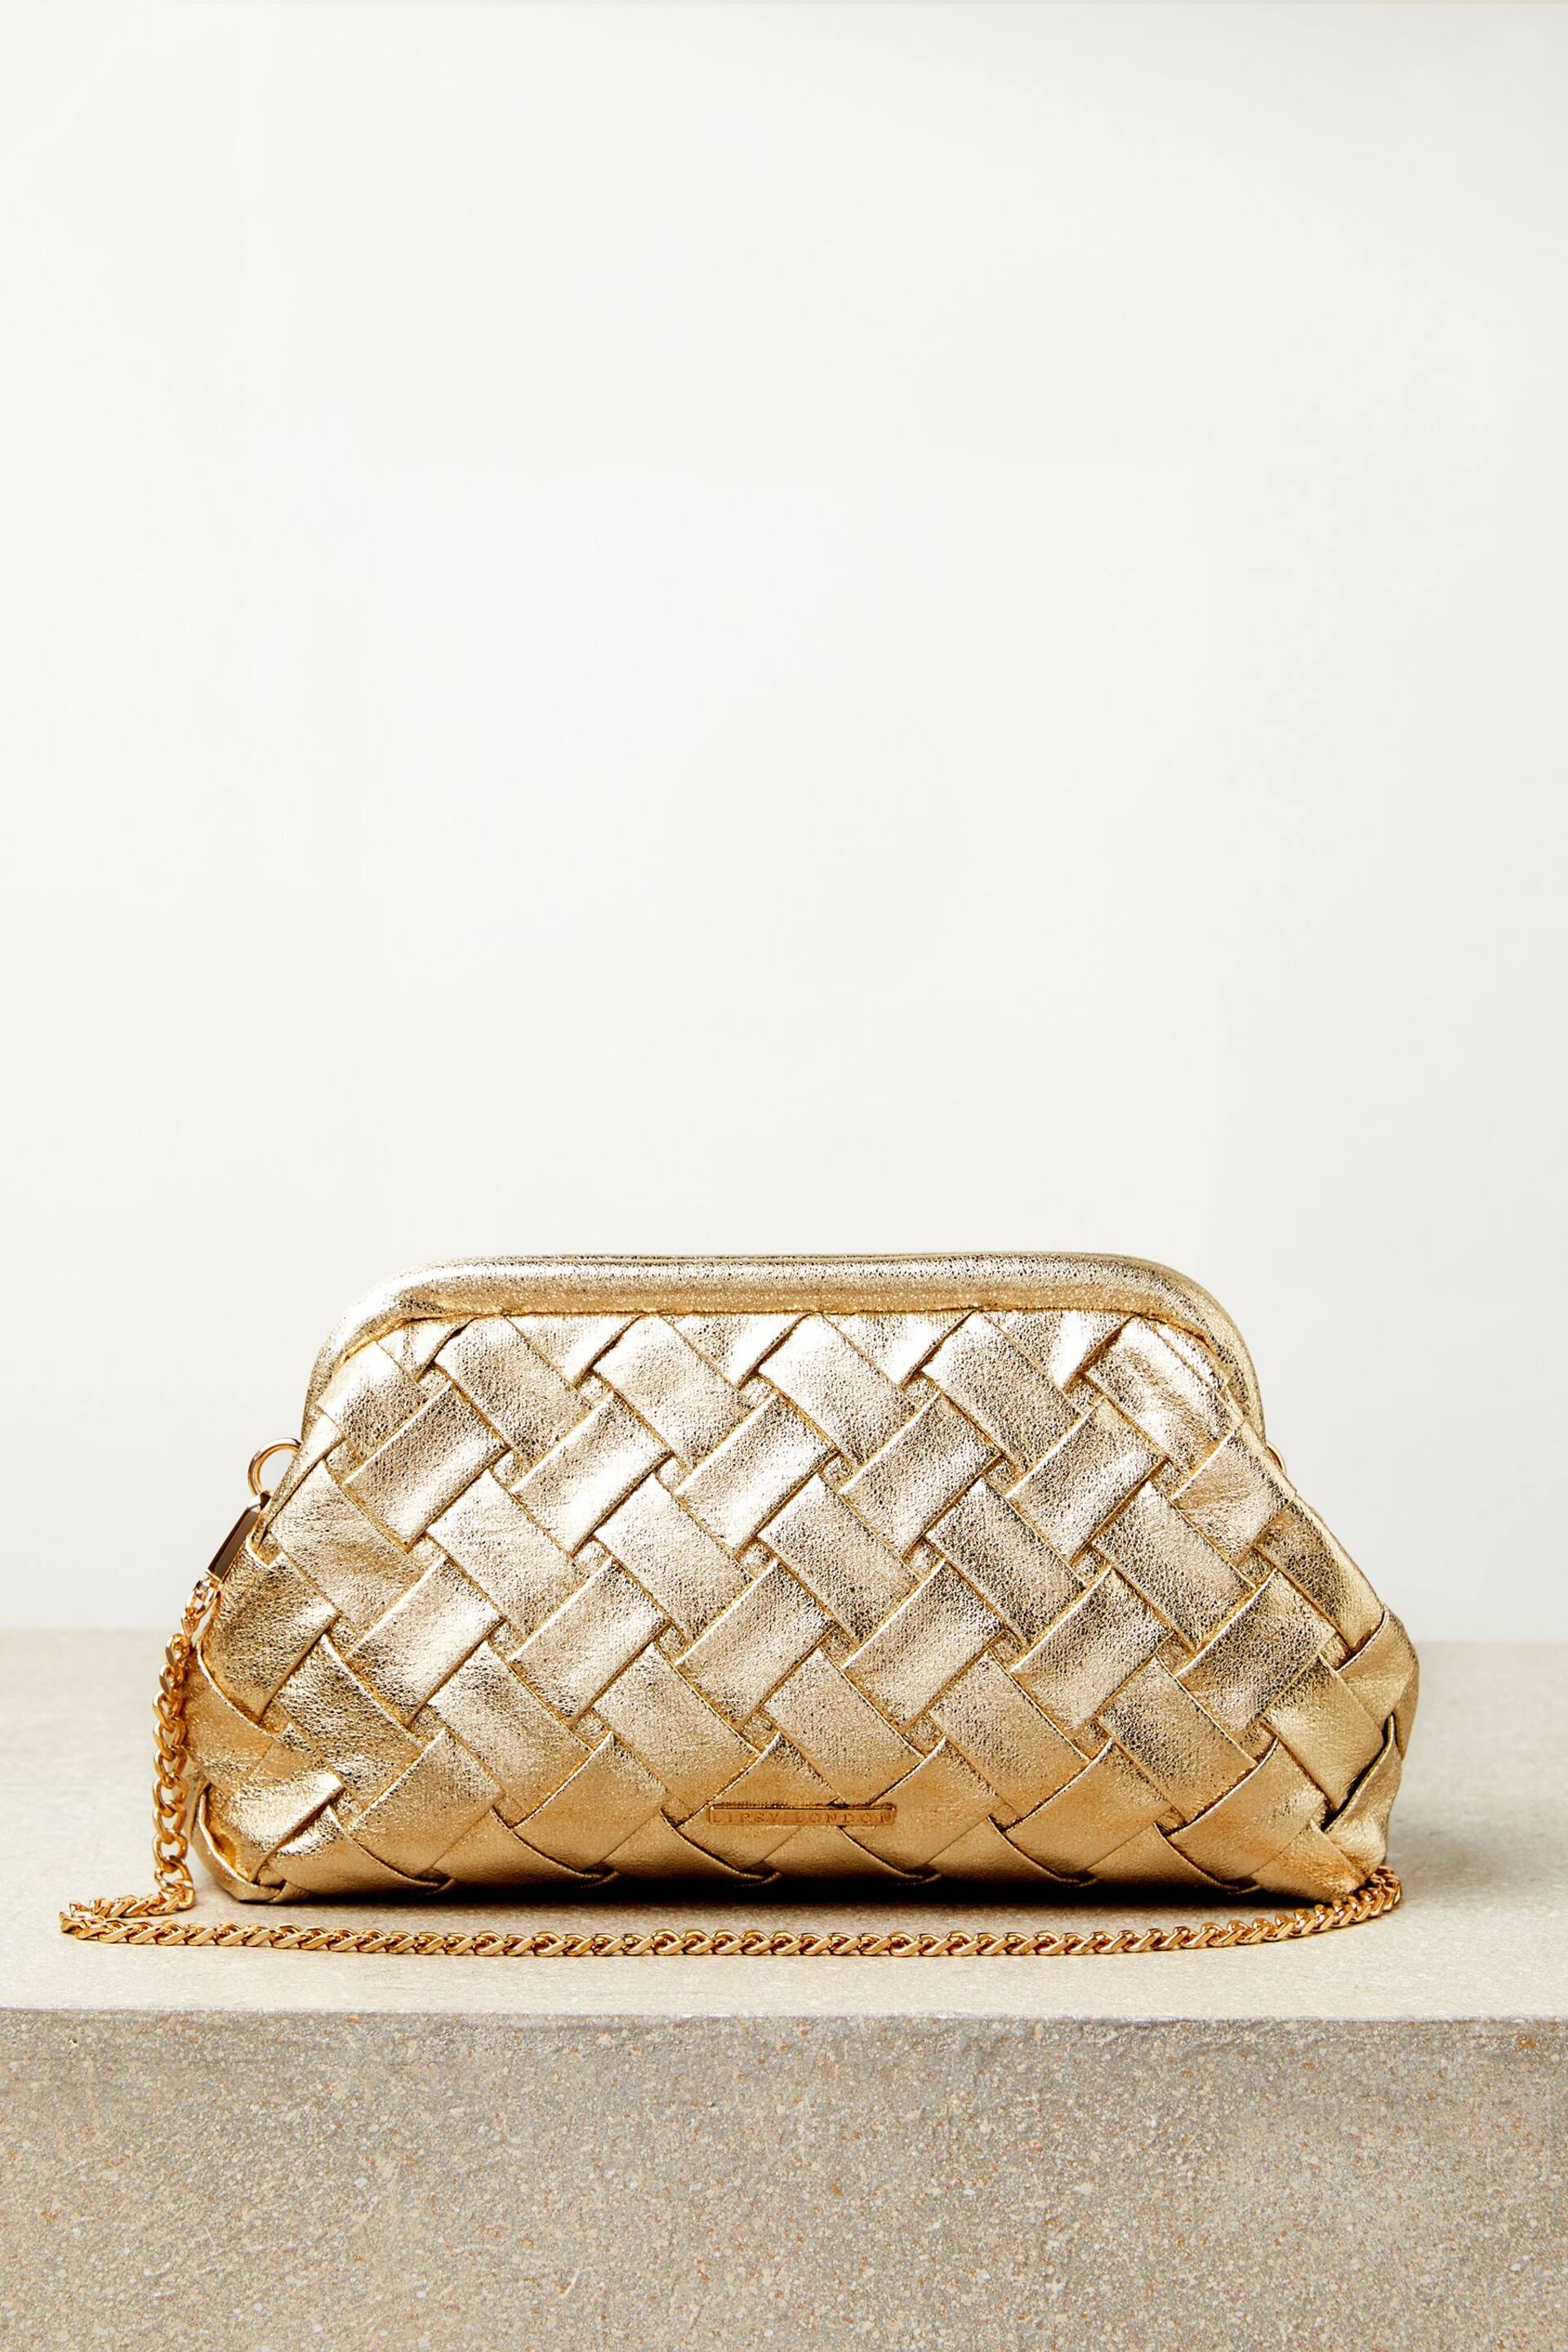 Lipsy Gold Pouch Clutch Bag - Image 1 of 5